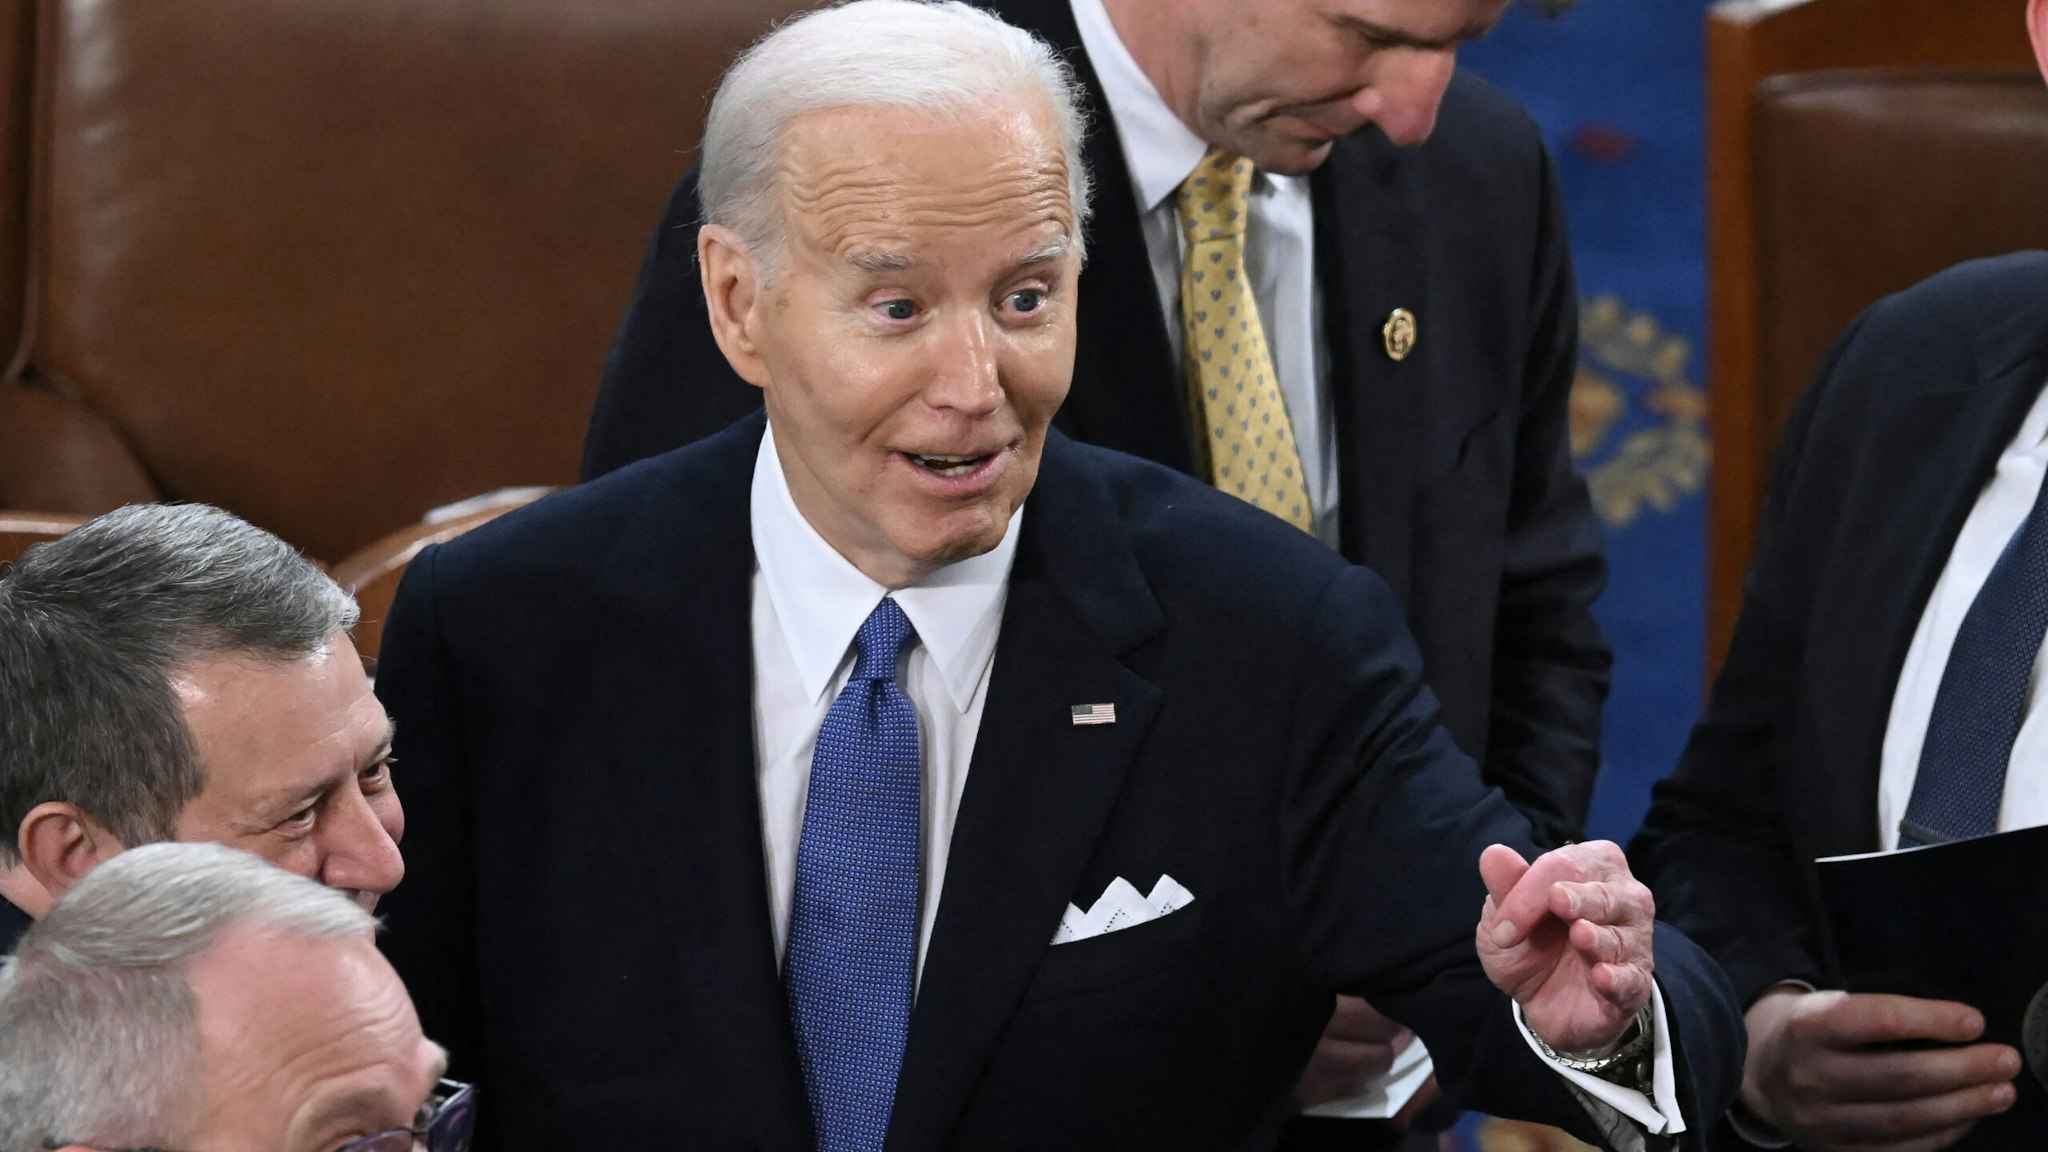 US President Joe Biden mingles with lawmakers as he departs at the conclusion of his State of the Union address in the House Chamber of the US Capitol in Washington, DC, on March 7, 2024.